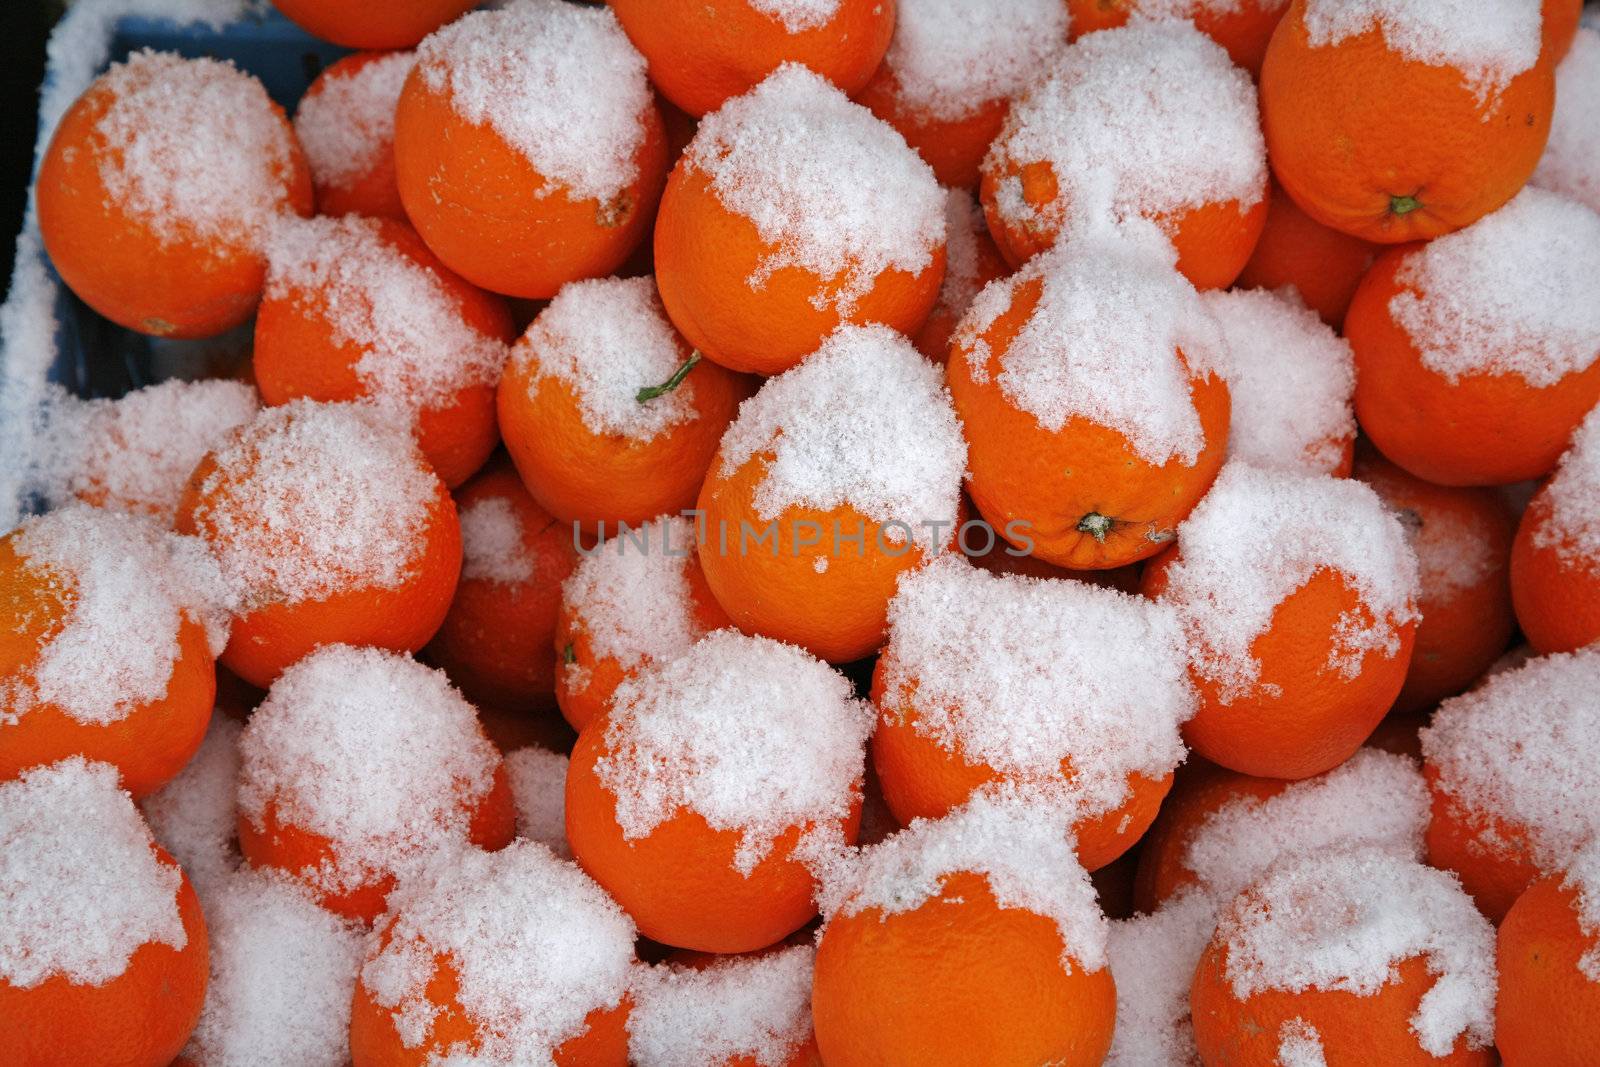 Oranges with snow by ABCDK